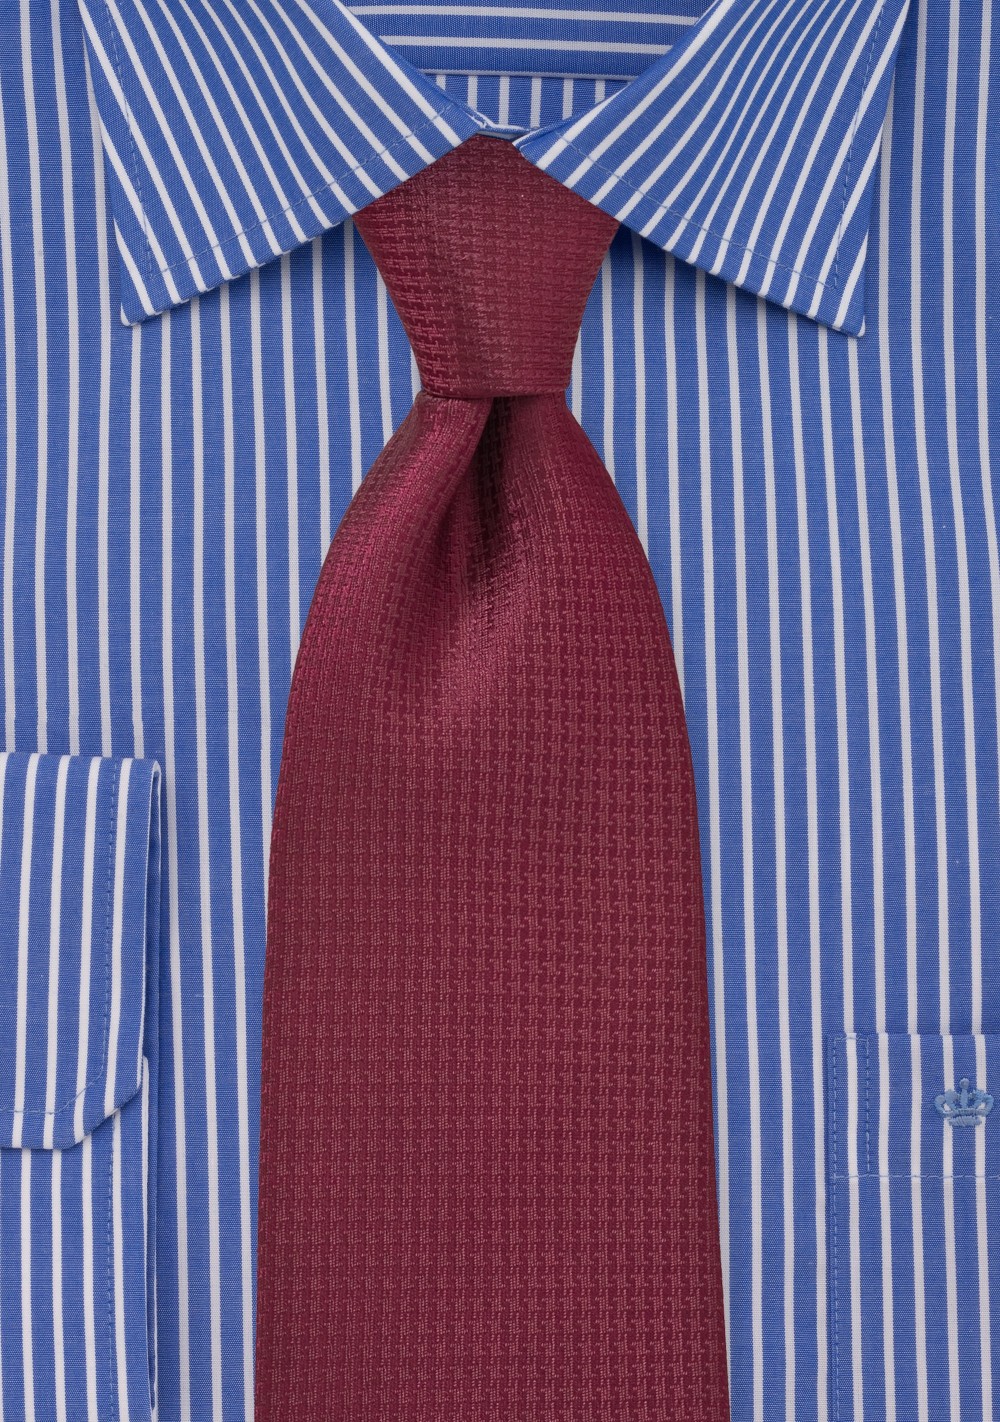 Micro Houndstooth Check Tie in Merlot Red